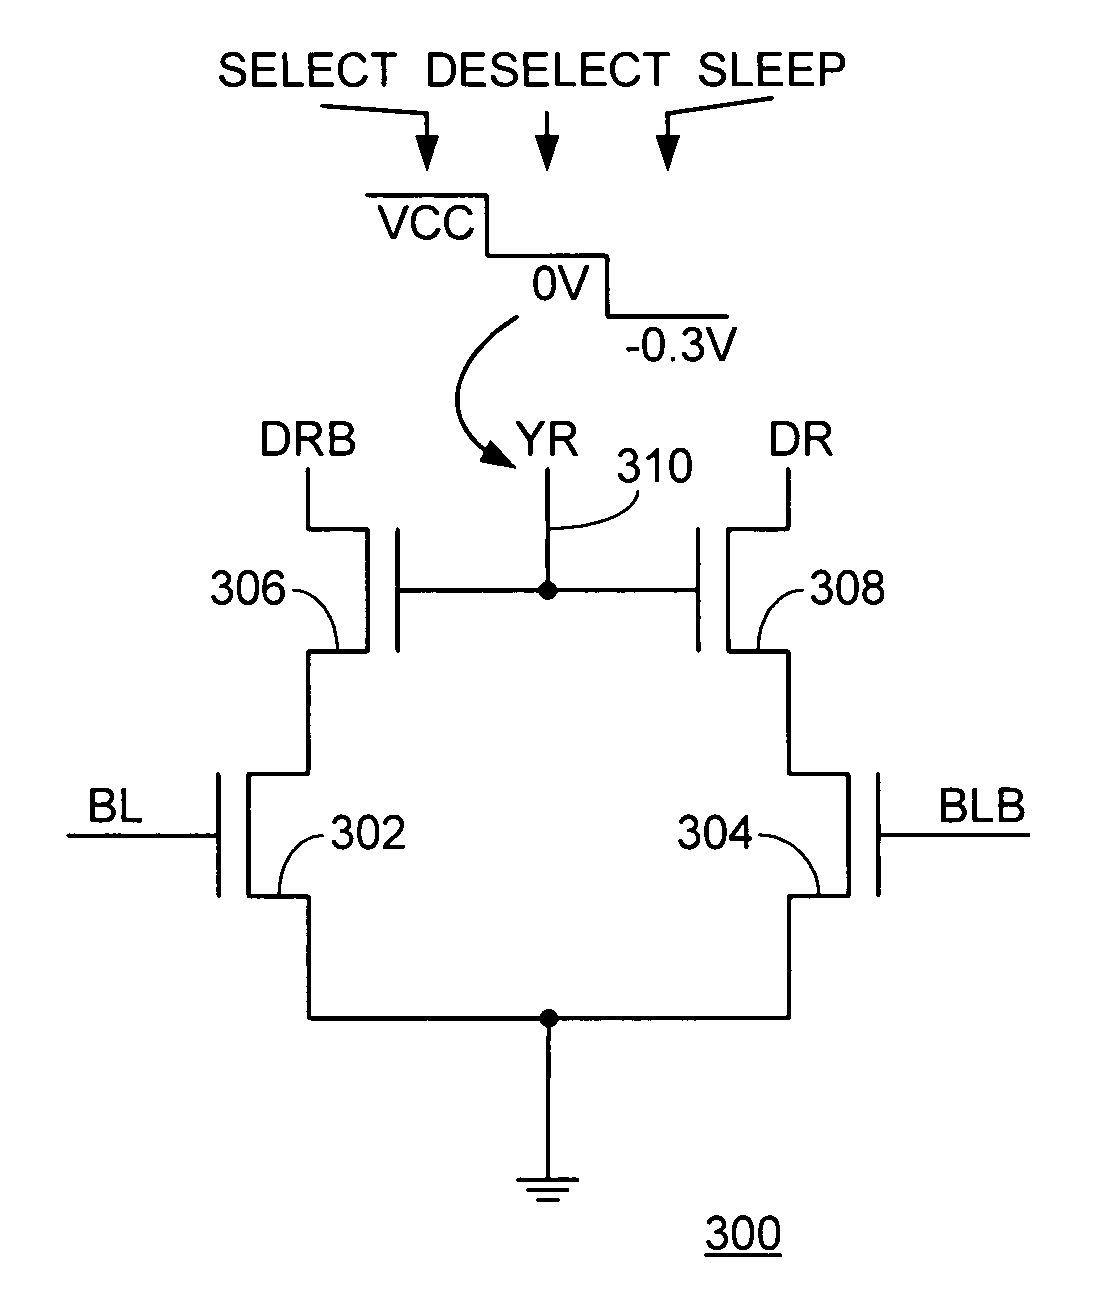 Column read amplifier power-gating technique for integrated circuit memory devices and those devices incorporating embedded dynamic random access memory (DRAM)